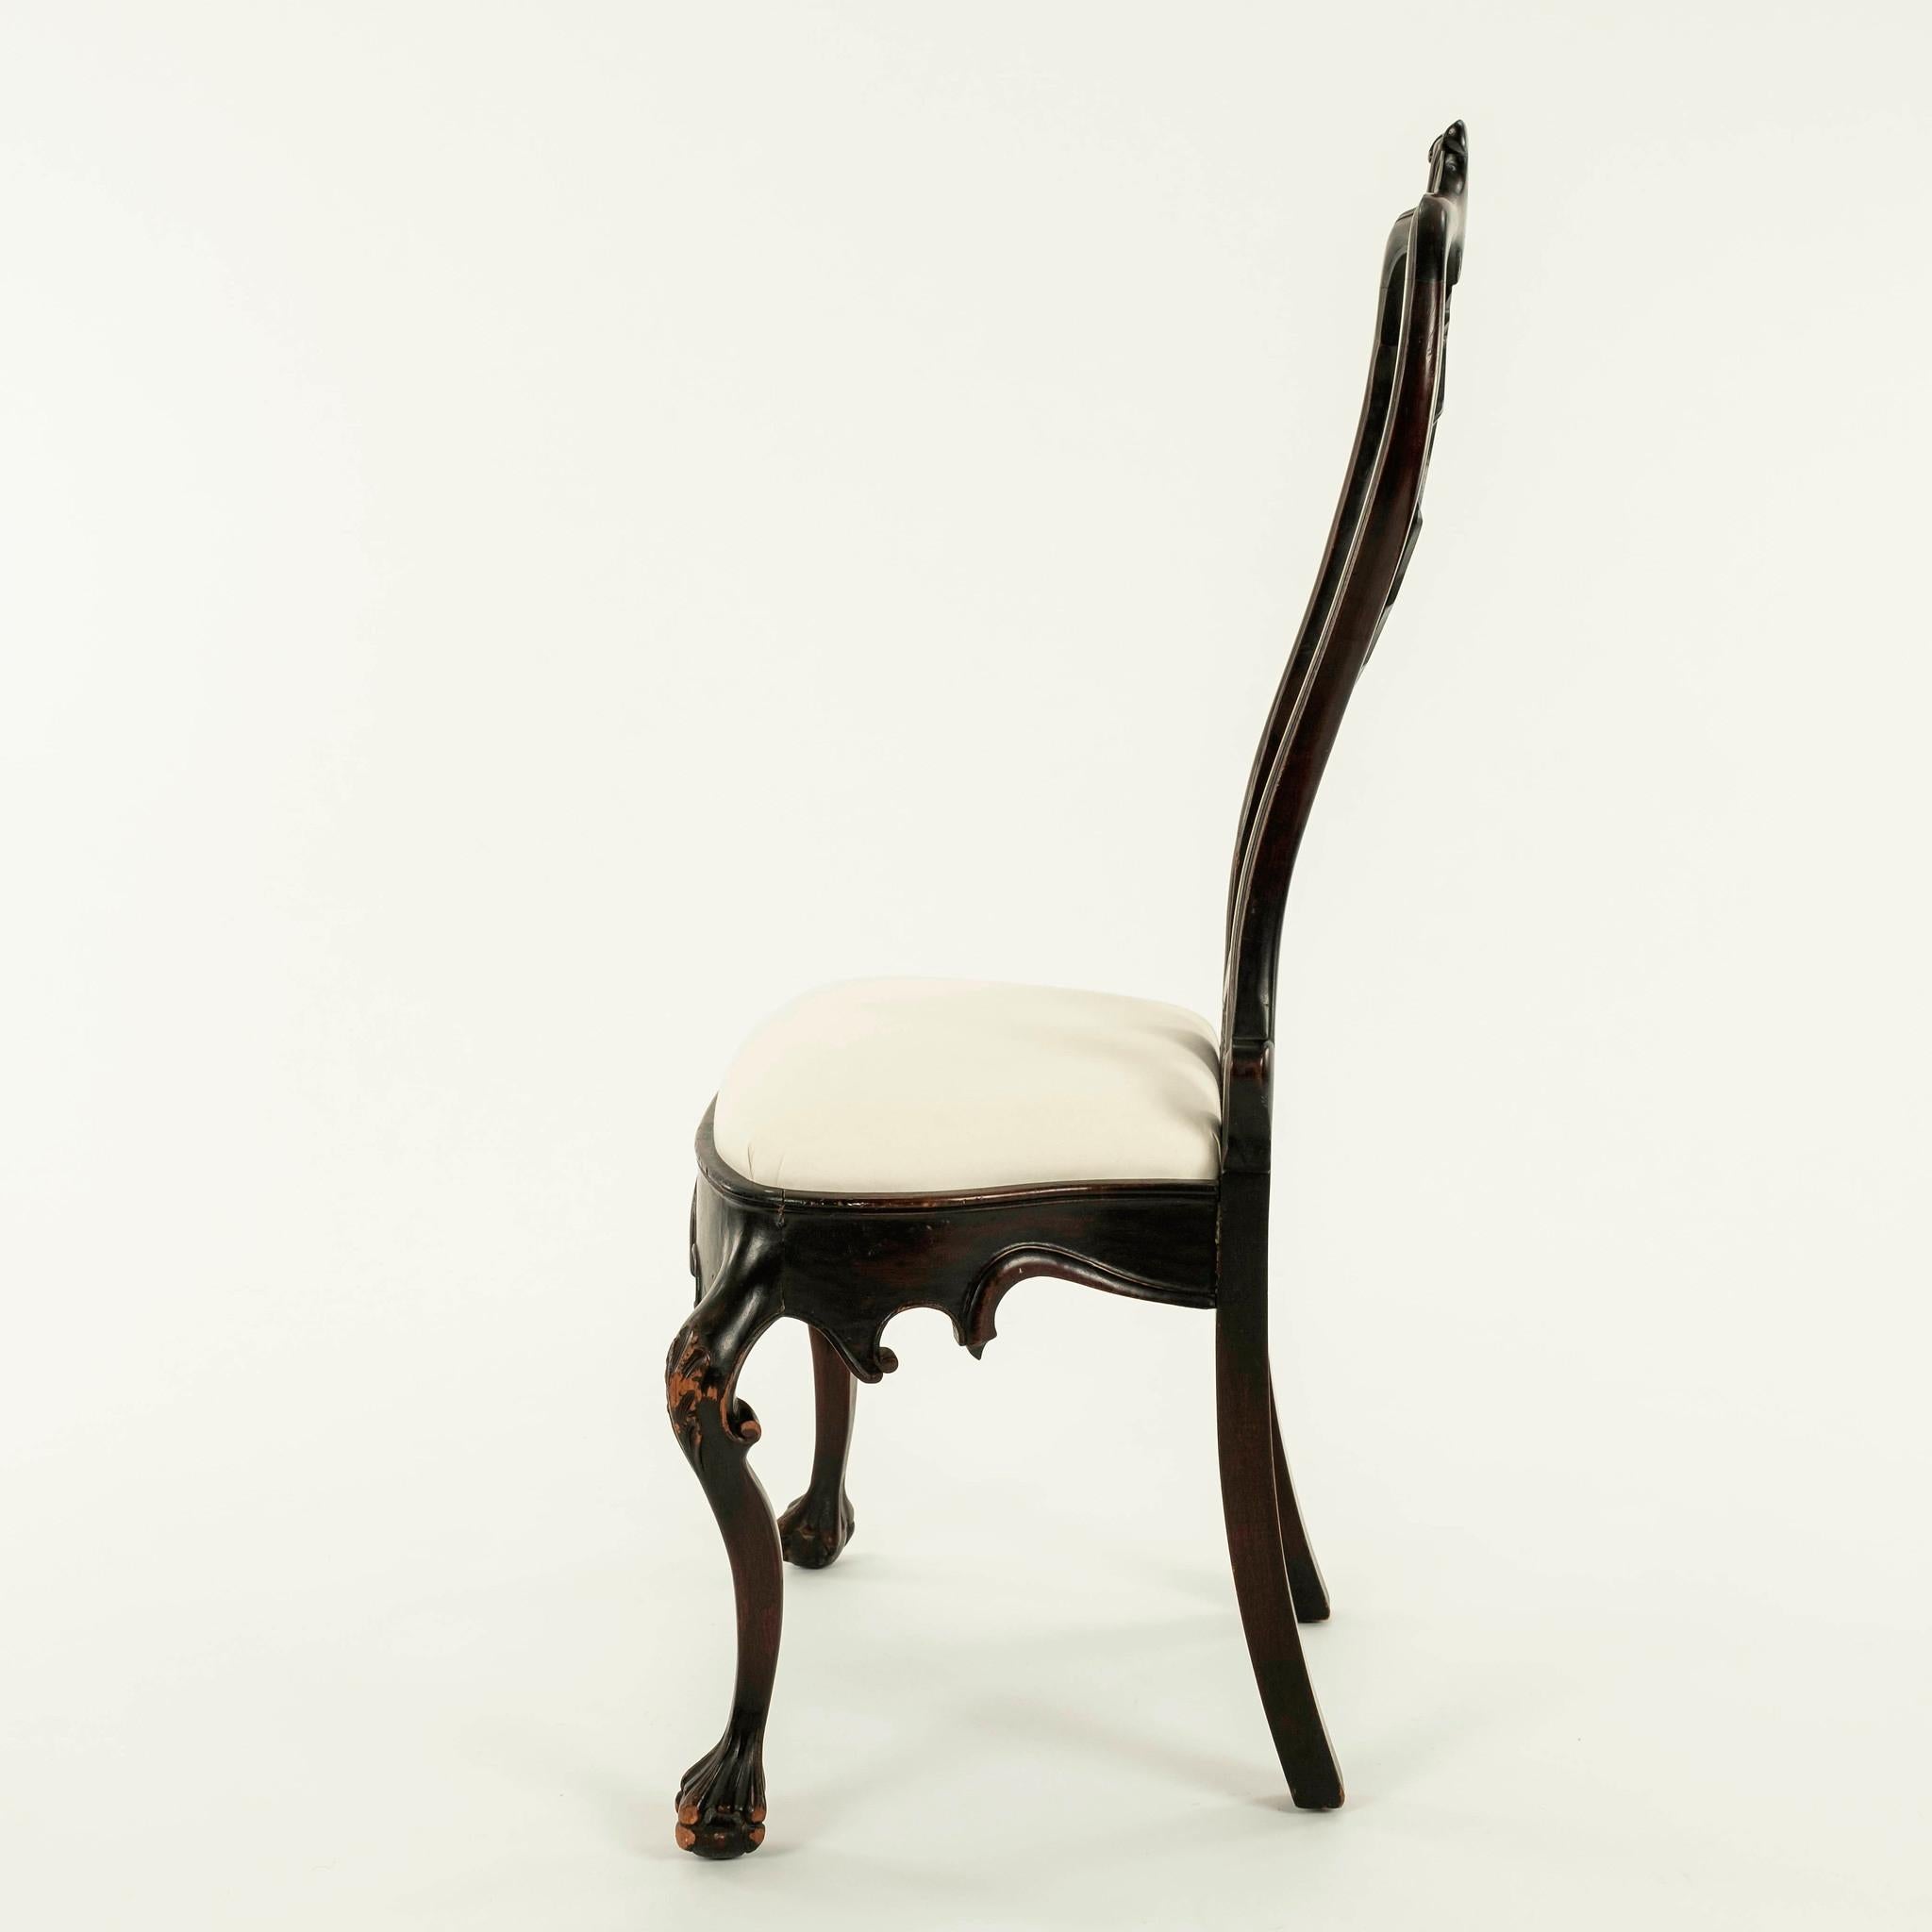 19th century Portuguese Rococo style mahogany chair featuring a scrolled crest on a double yolk back centering a shaped flat splat, scalloped seat rail centering a stylized splayed leaf pendant raised on exaggerated cabriole legs with foliate carved